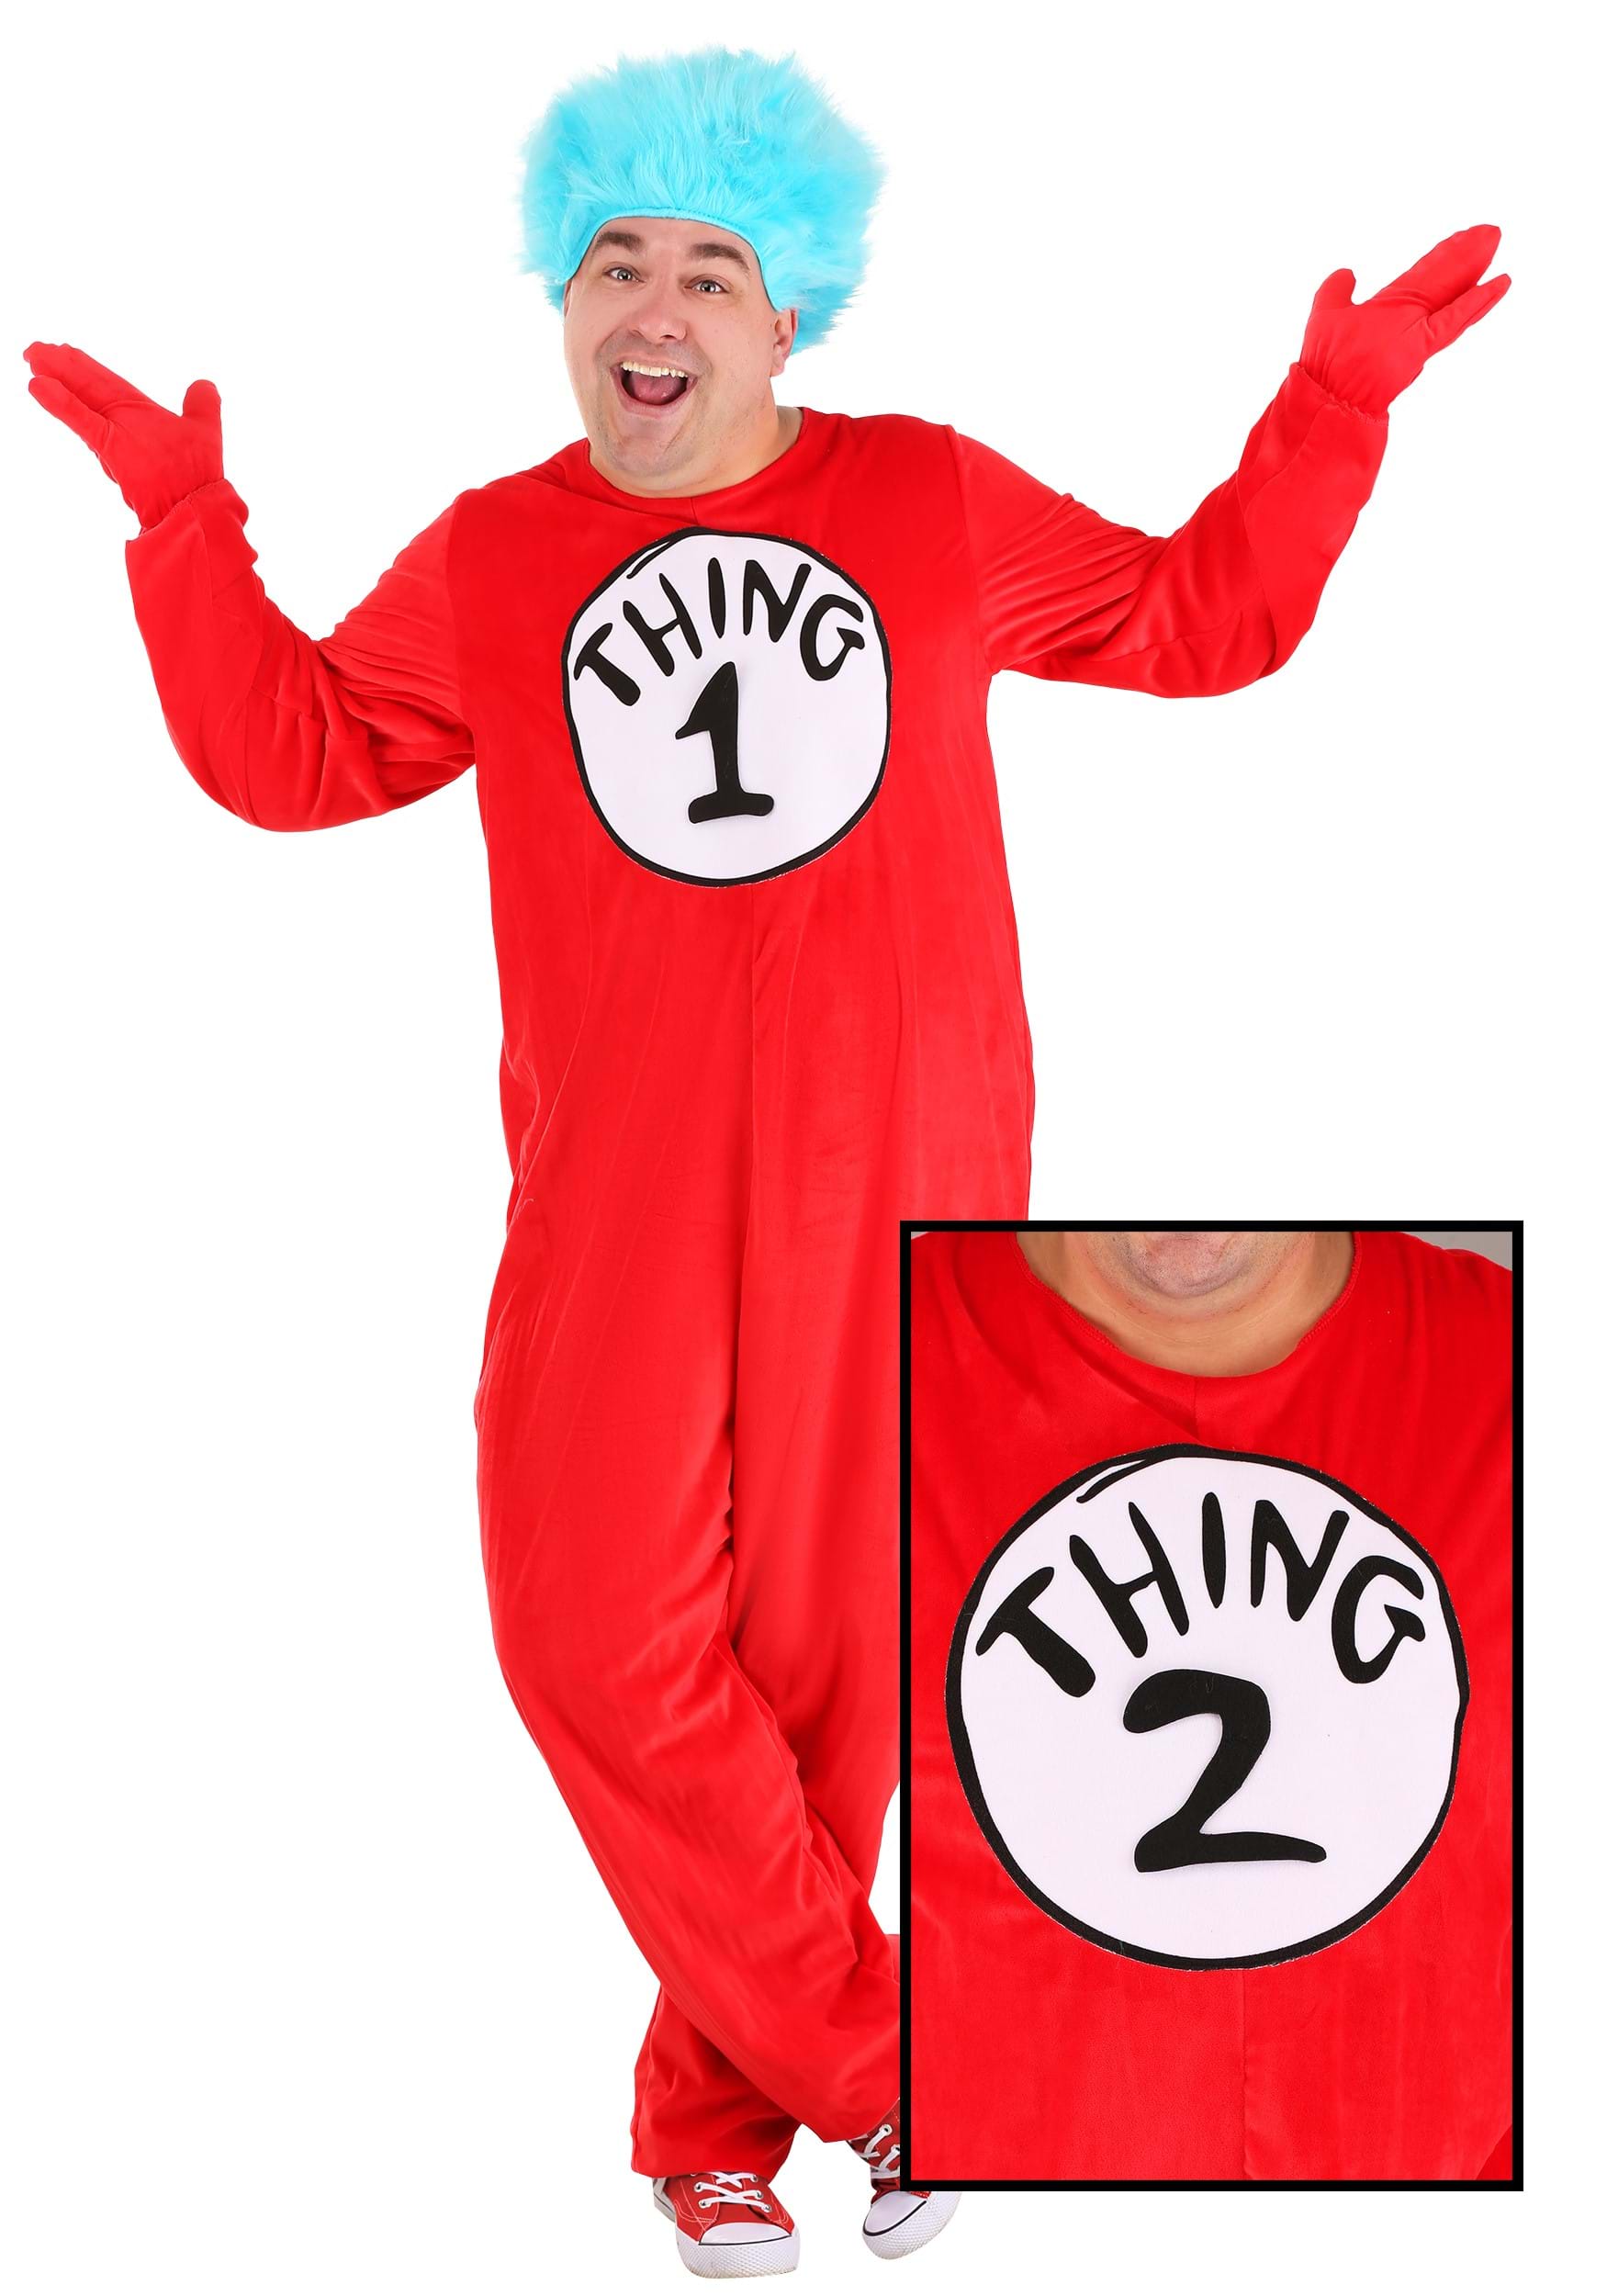 Thing 1&2 Plus Size Costume for Adults